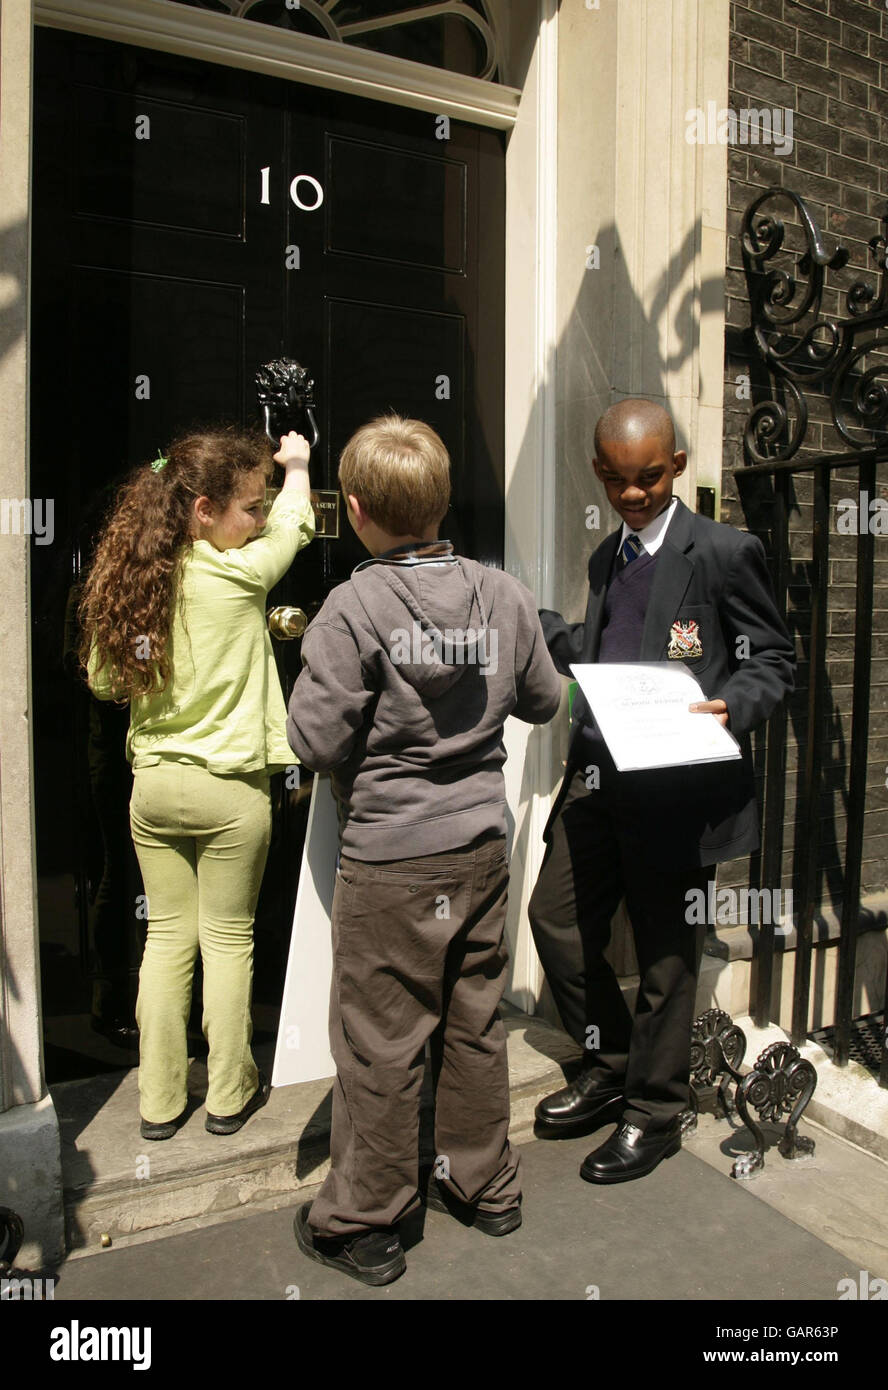 Southwark school children with dyslexia (L-R) Cara Abraham, Cameron Simson and Lenny Zvinoria outside 10 Downing Street, central London, to deliver an 'end of school term report' urging the government to fast-track their support for dyslexic children and their families following a series of damning reports from dyslexia charity Xtraordinary People. Stock Photo